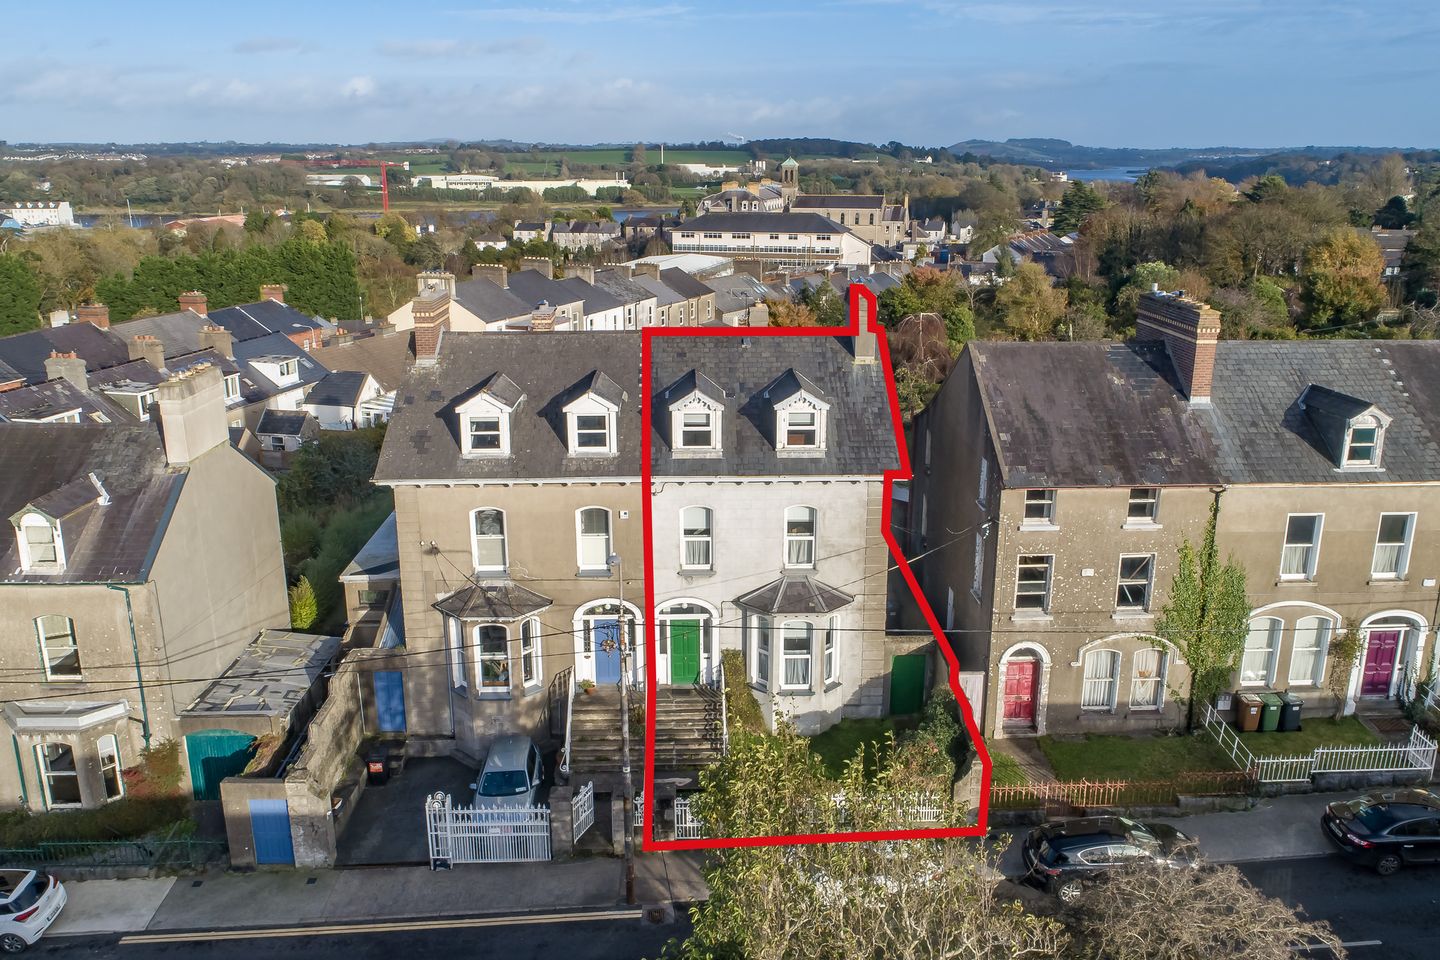 22 Grosvenor Terrace, John's Hill, Waterford City, Co. Waterford